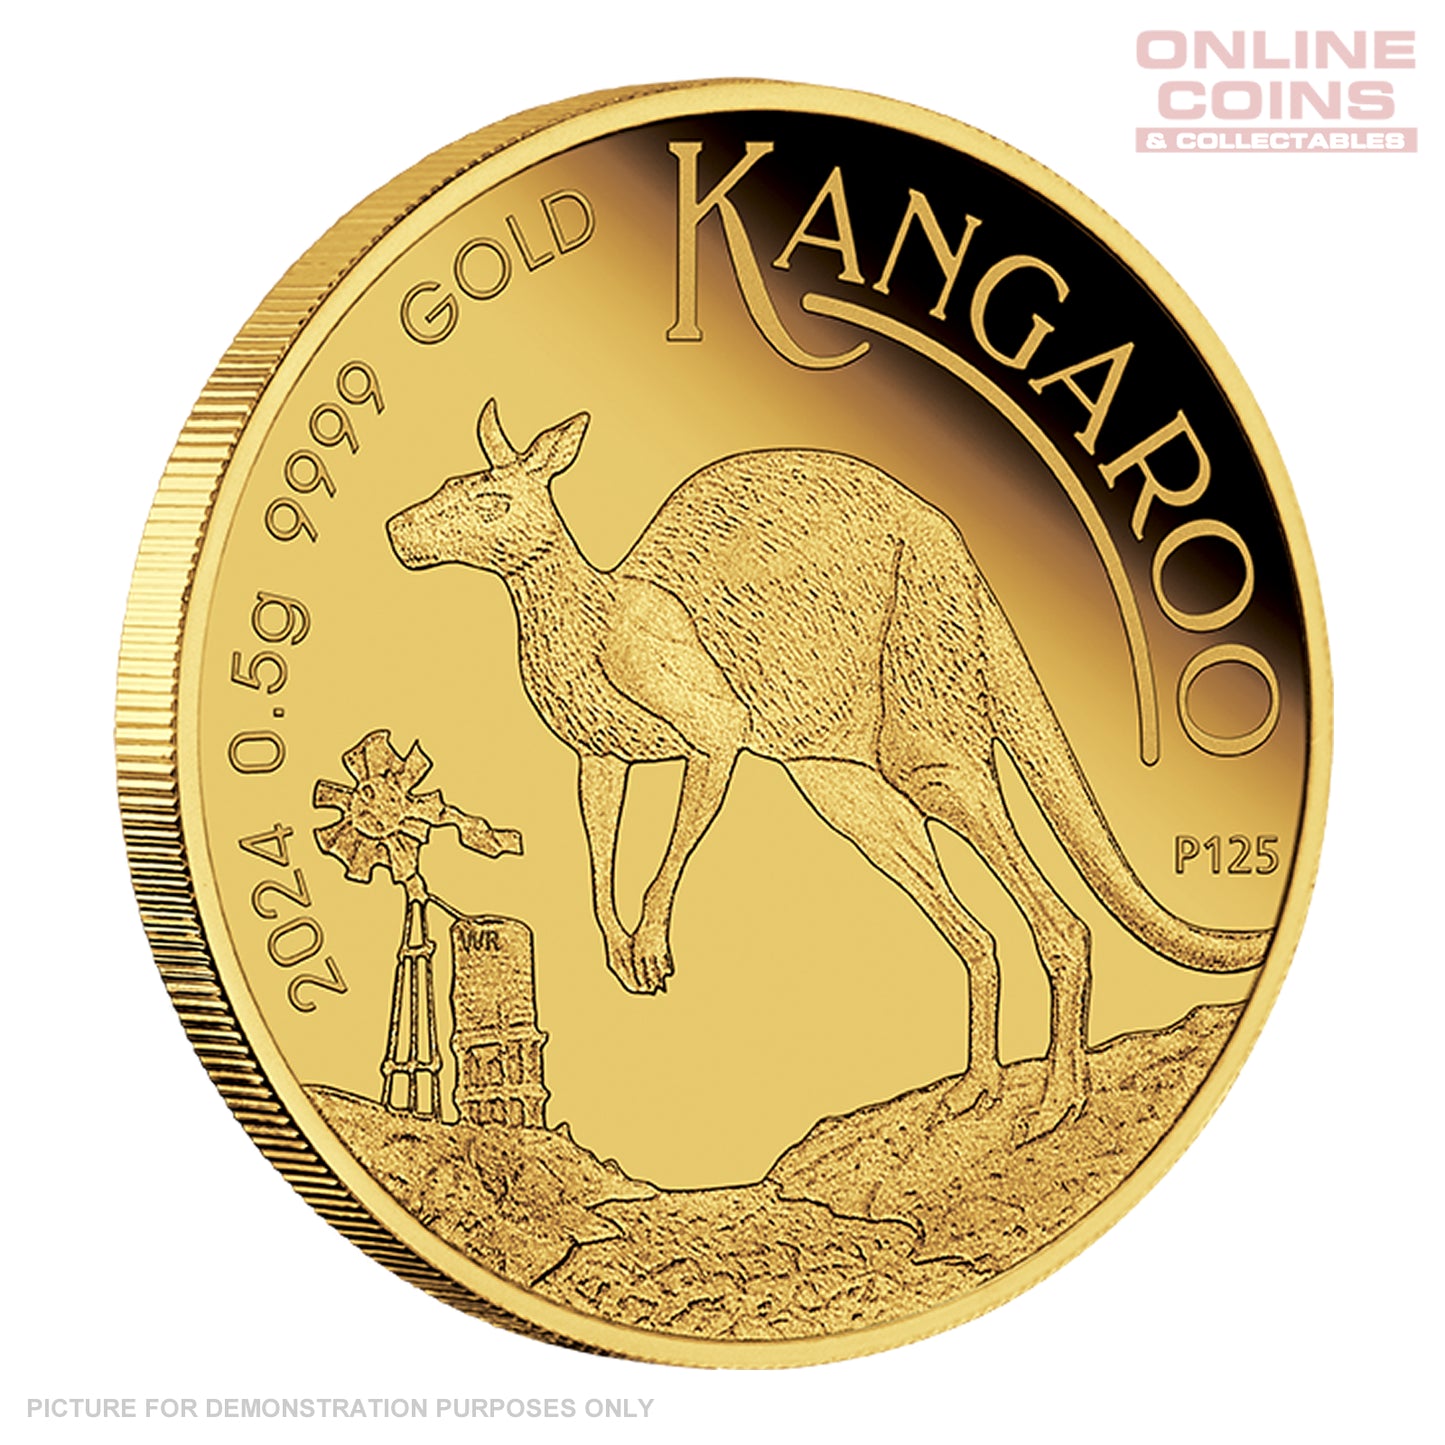 Perth Mint 0.5g Gold Proof Coin in Card - Mini Roo